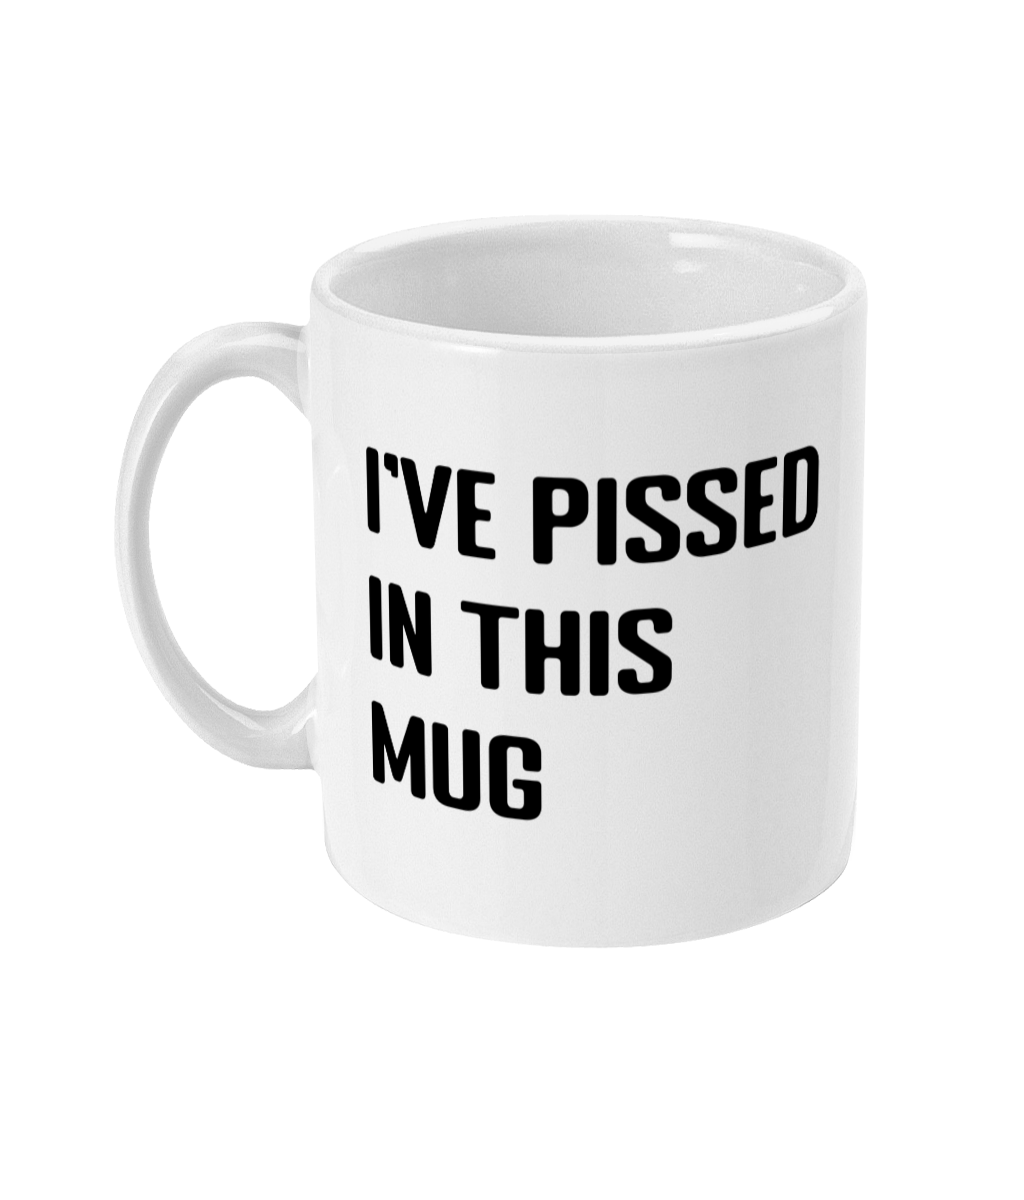 A glossy white 11oz mug with the words 'I've pissed in this mug' printed on it's centre in large block capital font. The mug is placed in front of a plain white background. 